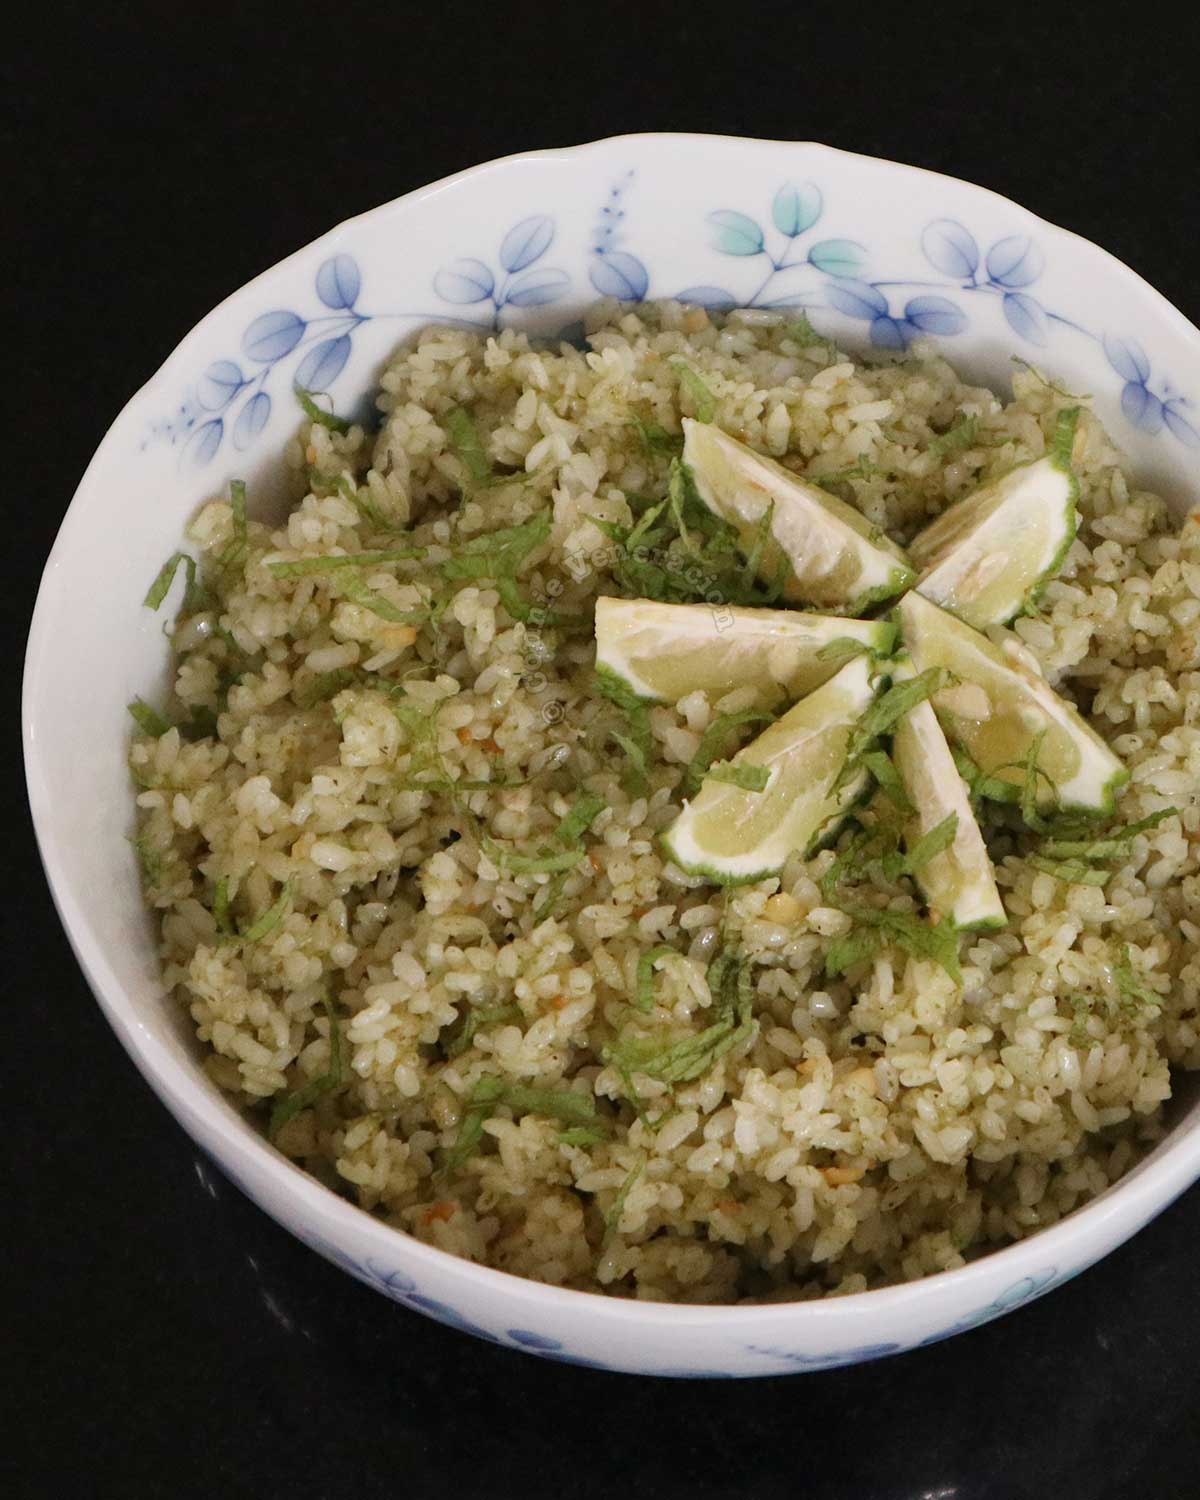 Pesto rice garnished with mint leaves and lime wedges